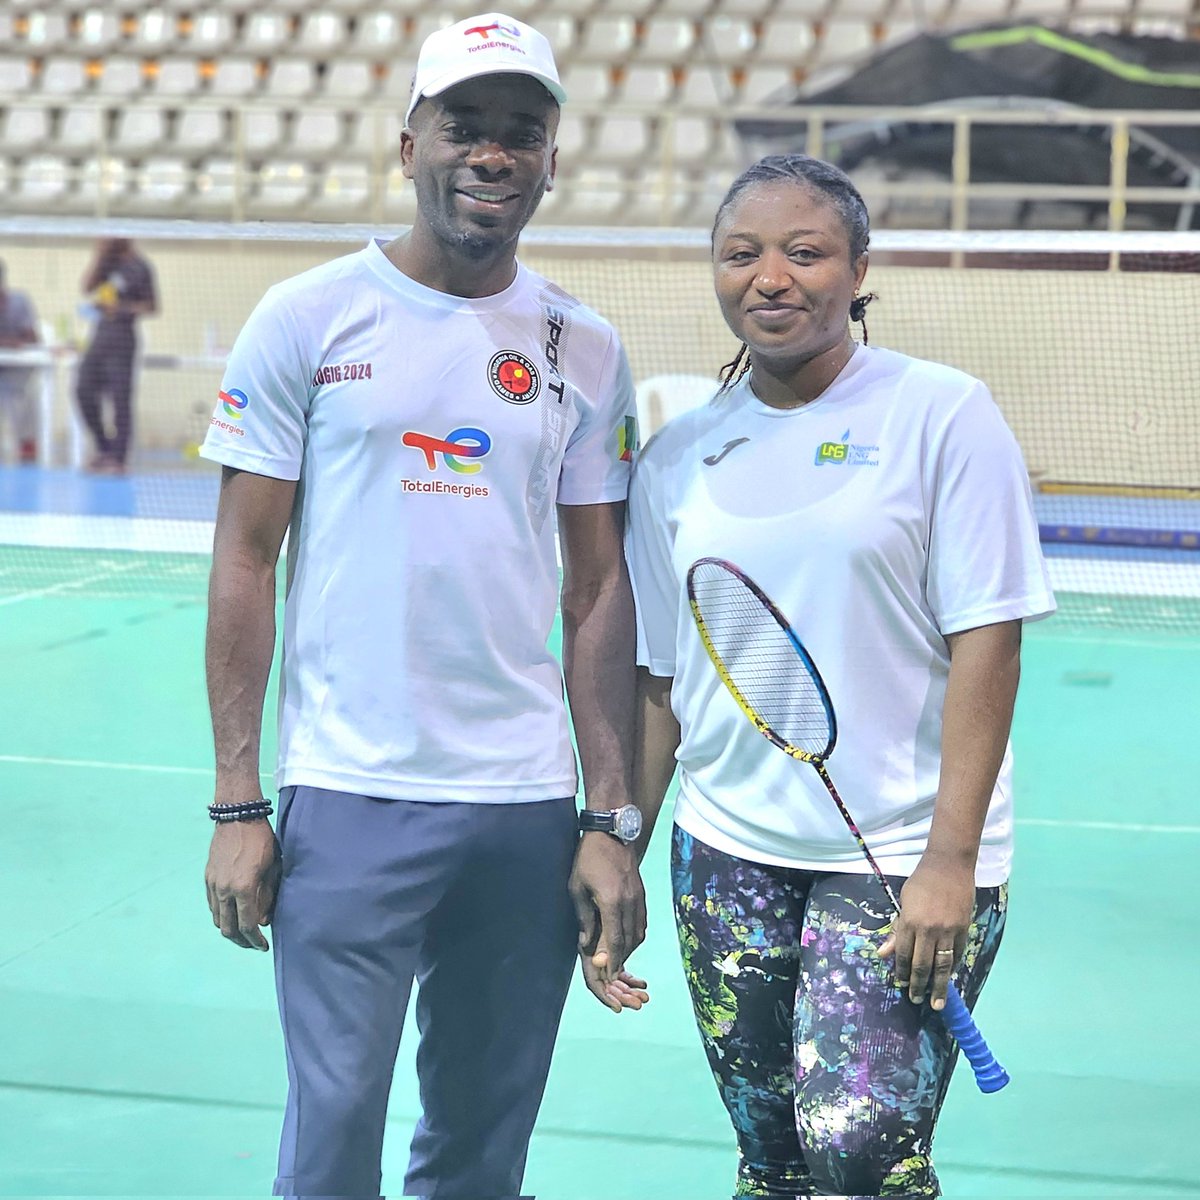 Ideal Sports Woman. Nice reunion with coursemate, Monica Adebayo. She plays Badminton and a very good footballer like her Husband, Nathaniel who is also a coursemate #ChemicalEngineers #Kadpolites #NOGIG2024